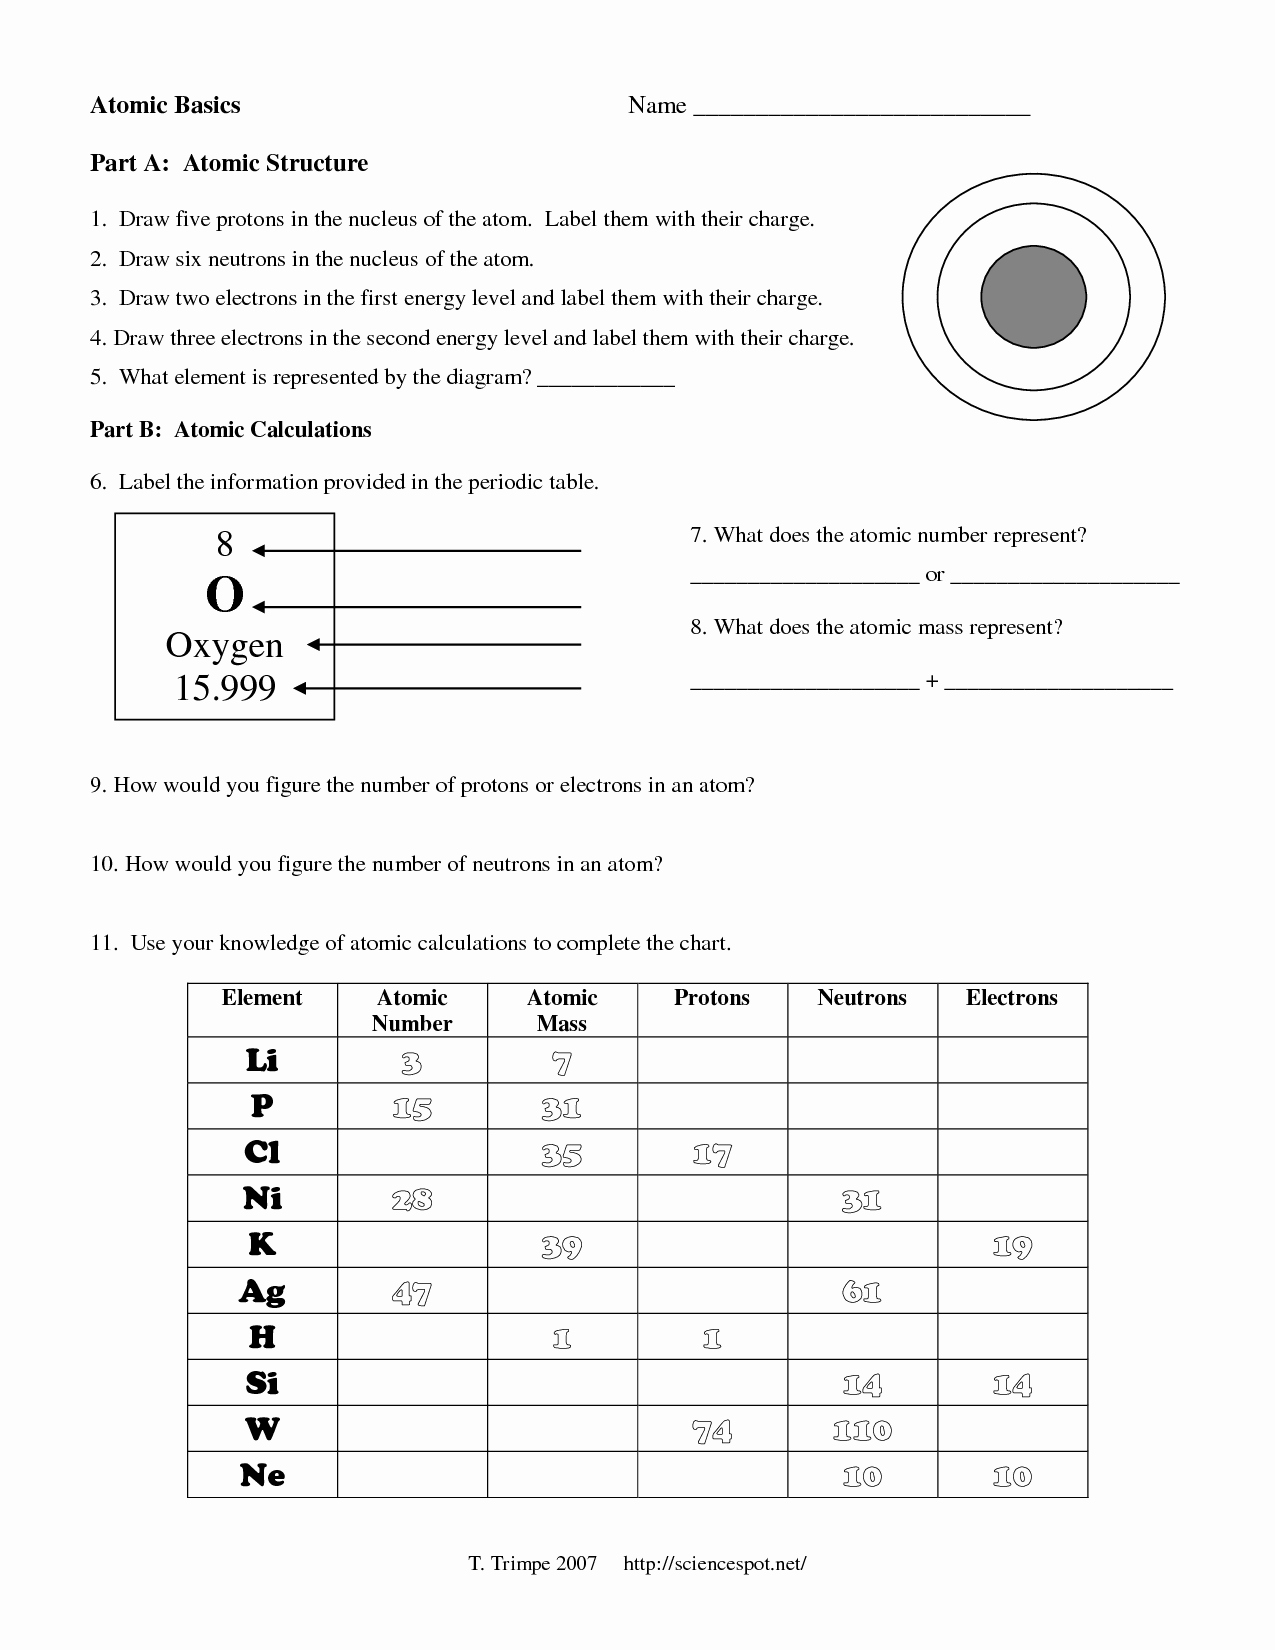 Atomic Structure Practice Worksheet Answers Unique Worksheet Basic atomic Structure Worksheet Answers Grass